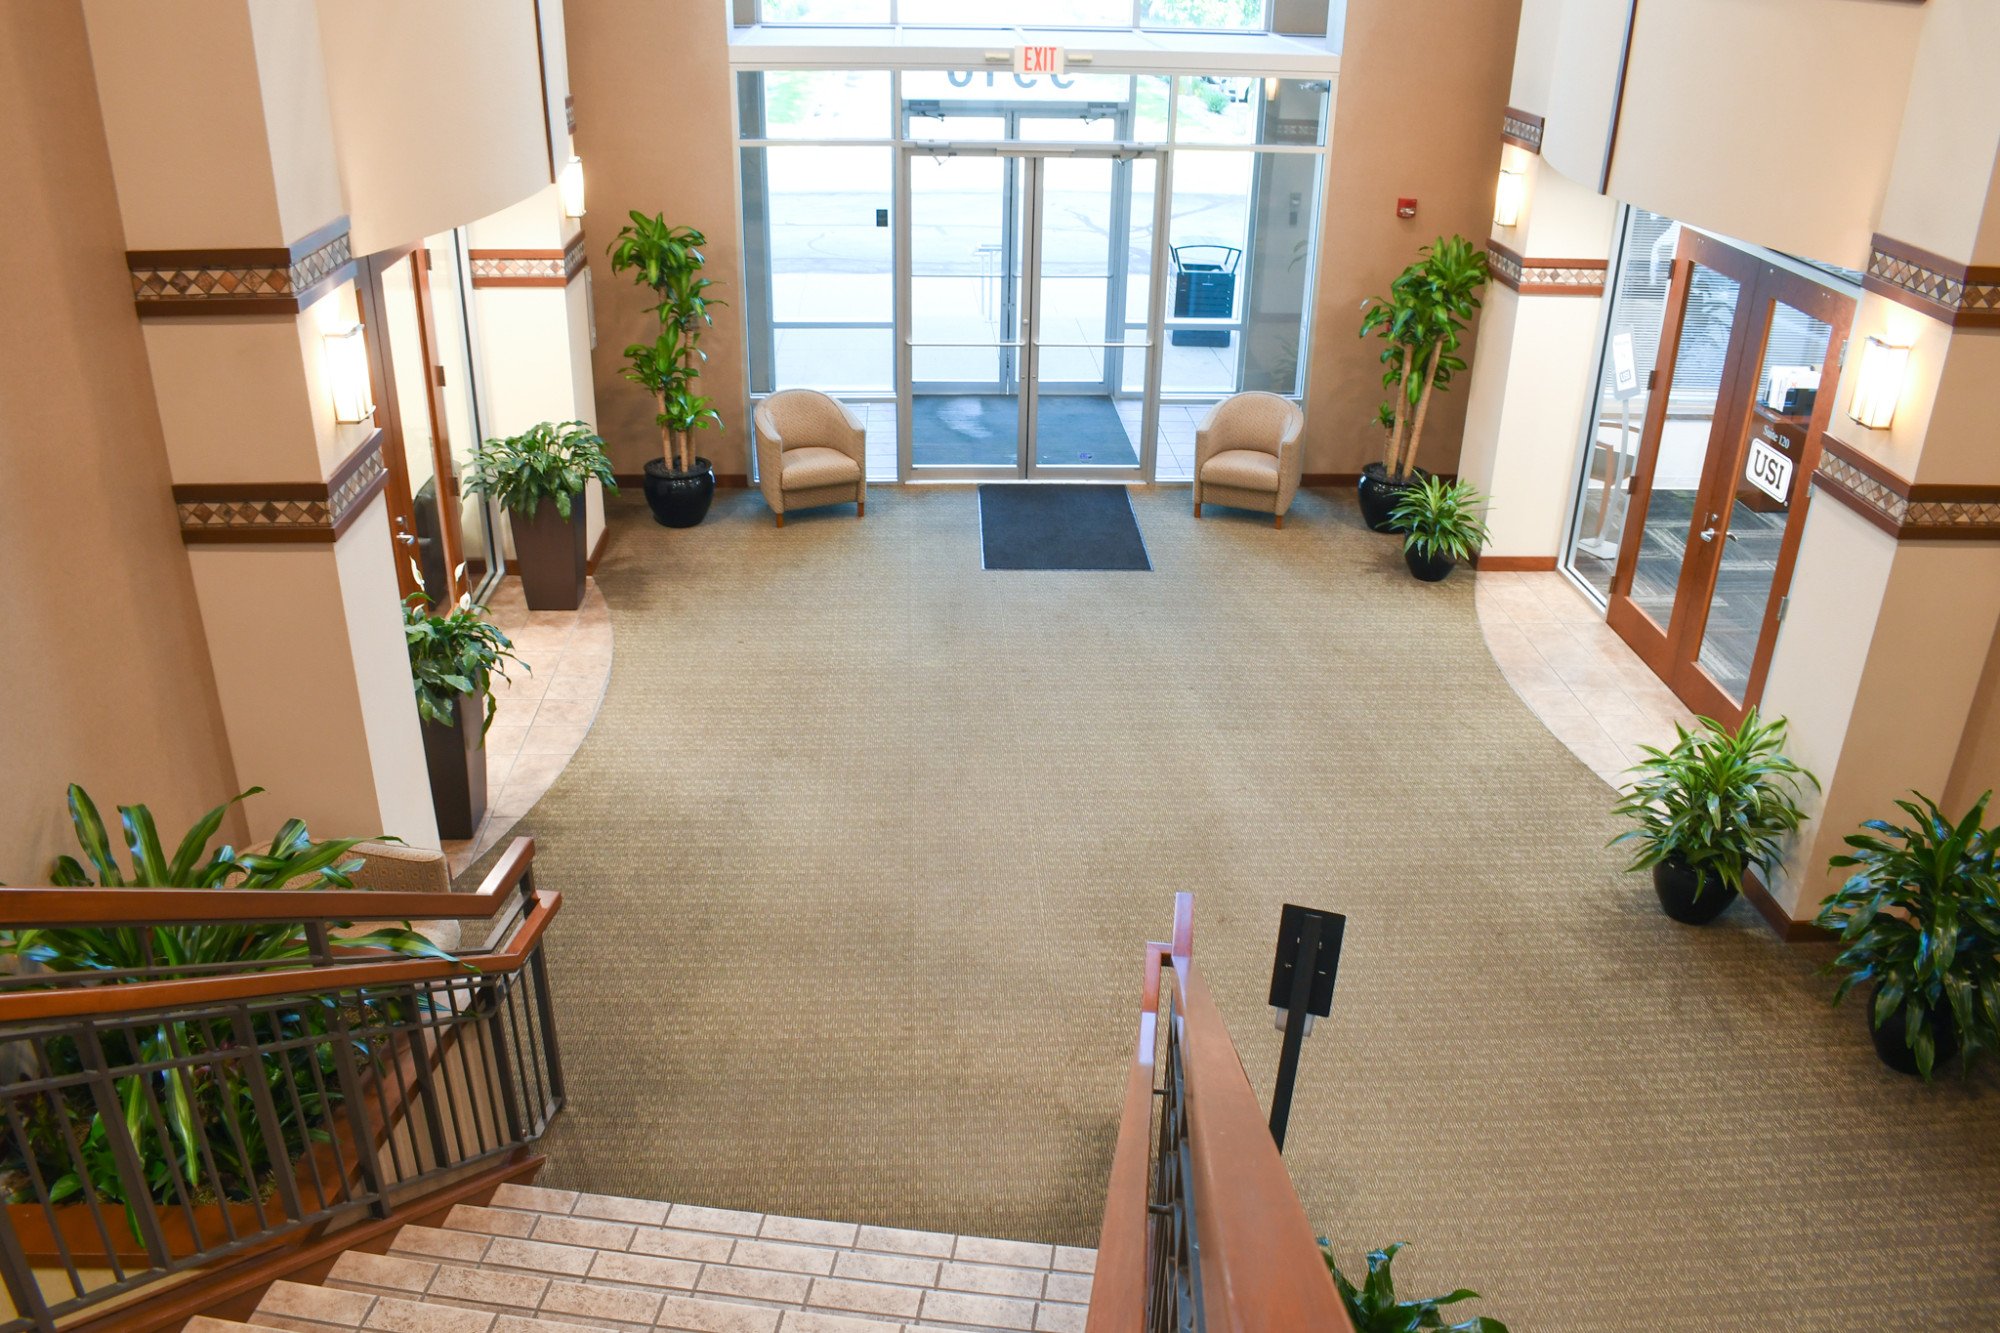 Sturges Property Group- Dupont Office Park III - 9910 Dupont Circle Dr 